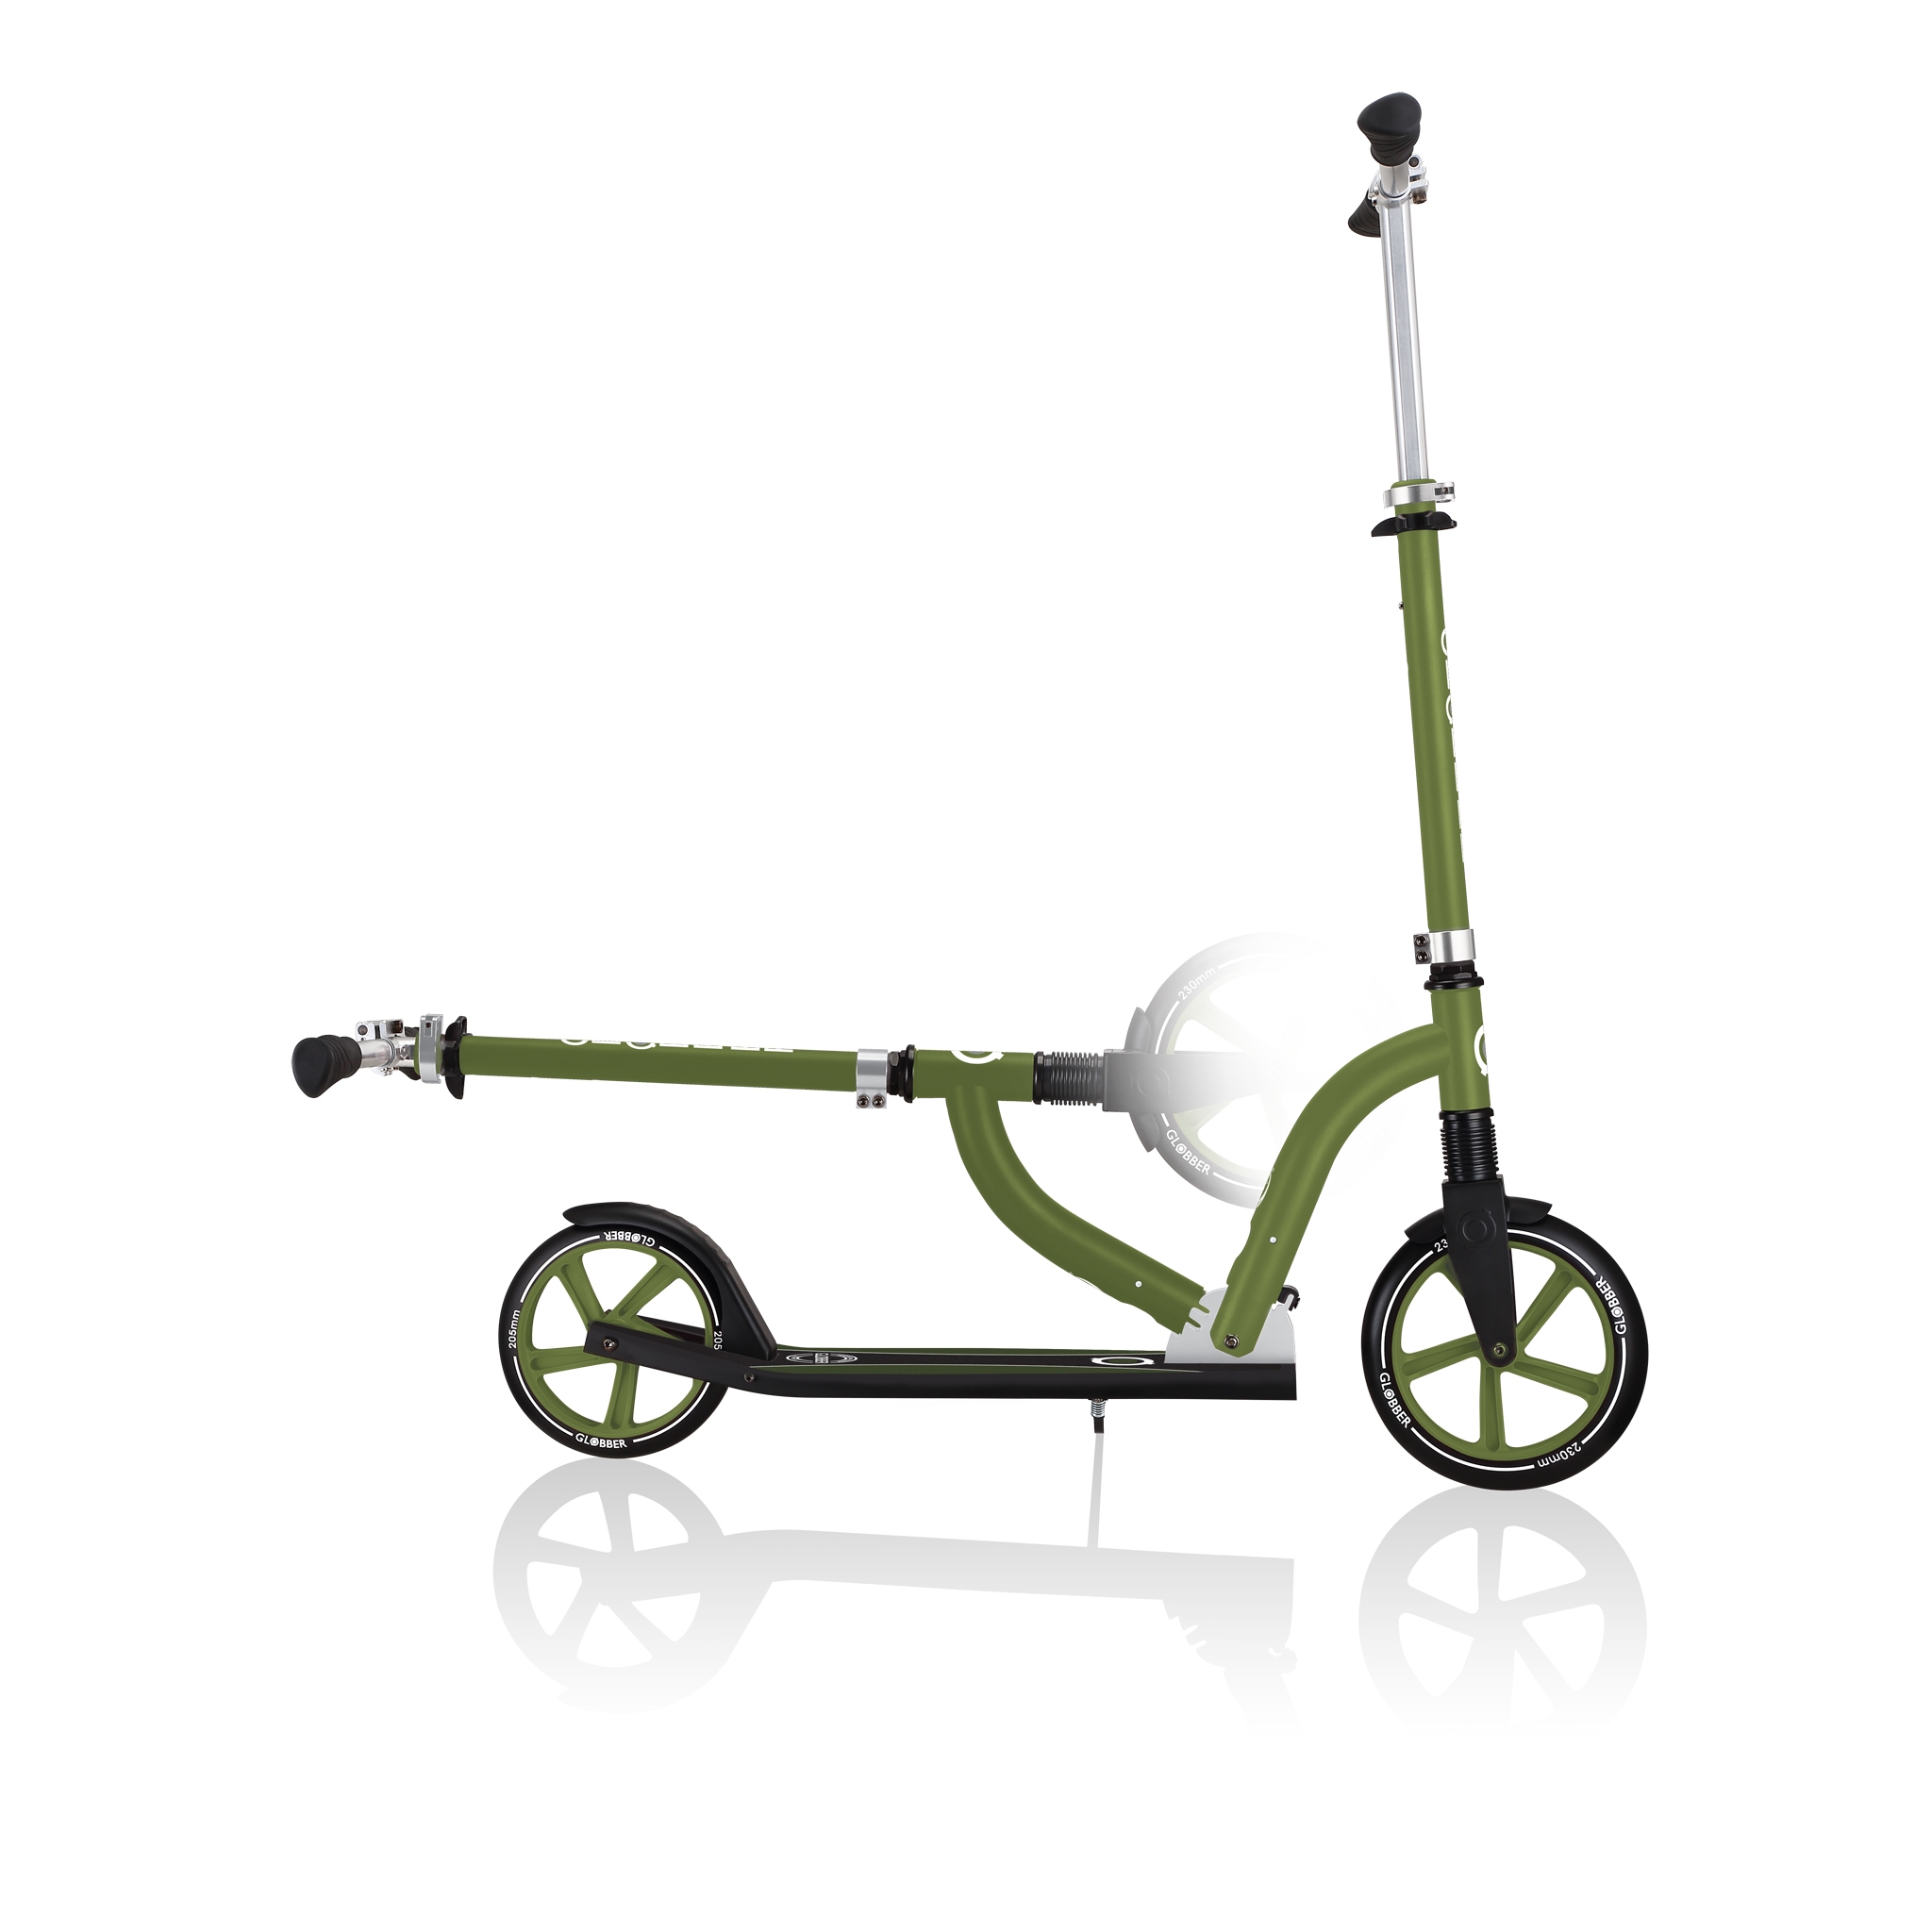 NL-230-205-DUO-folding-big-wheel-scooters-for-kids-and-teens 4